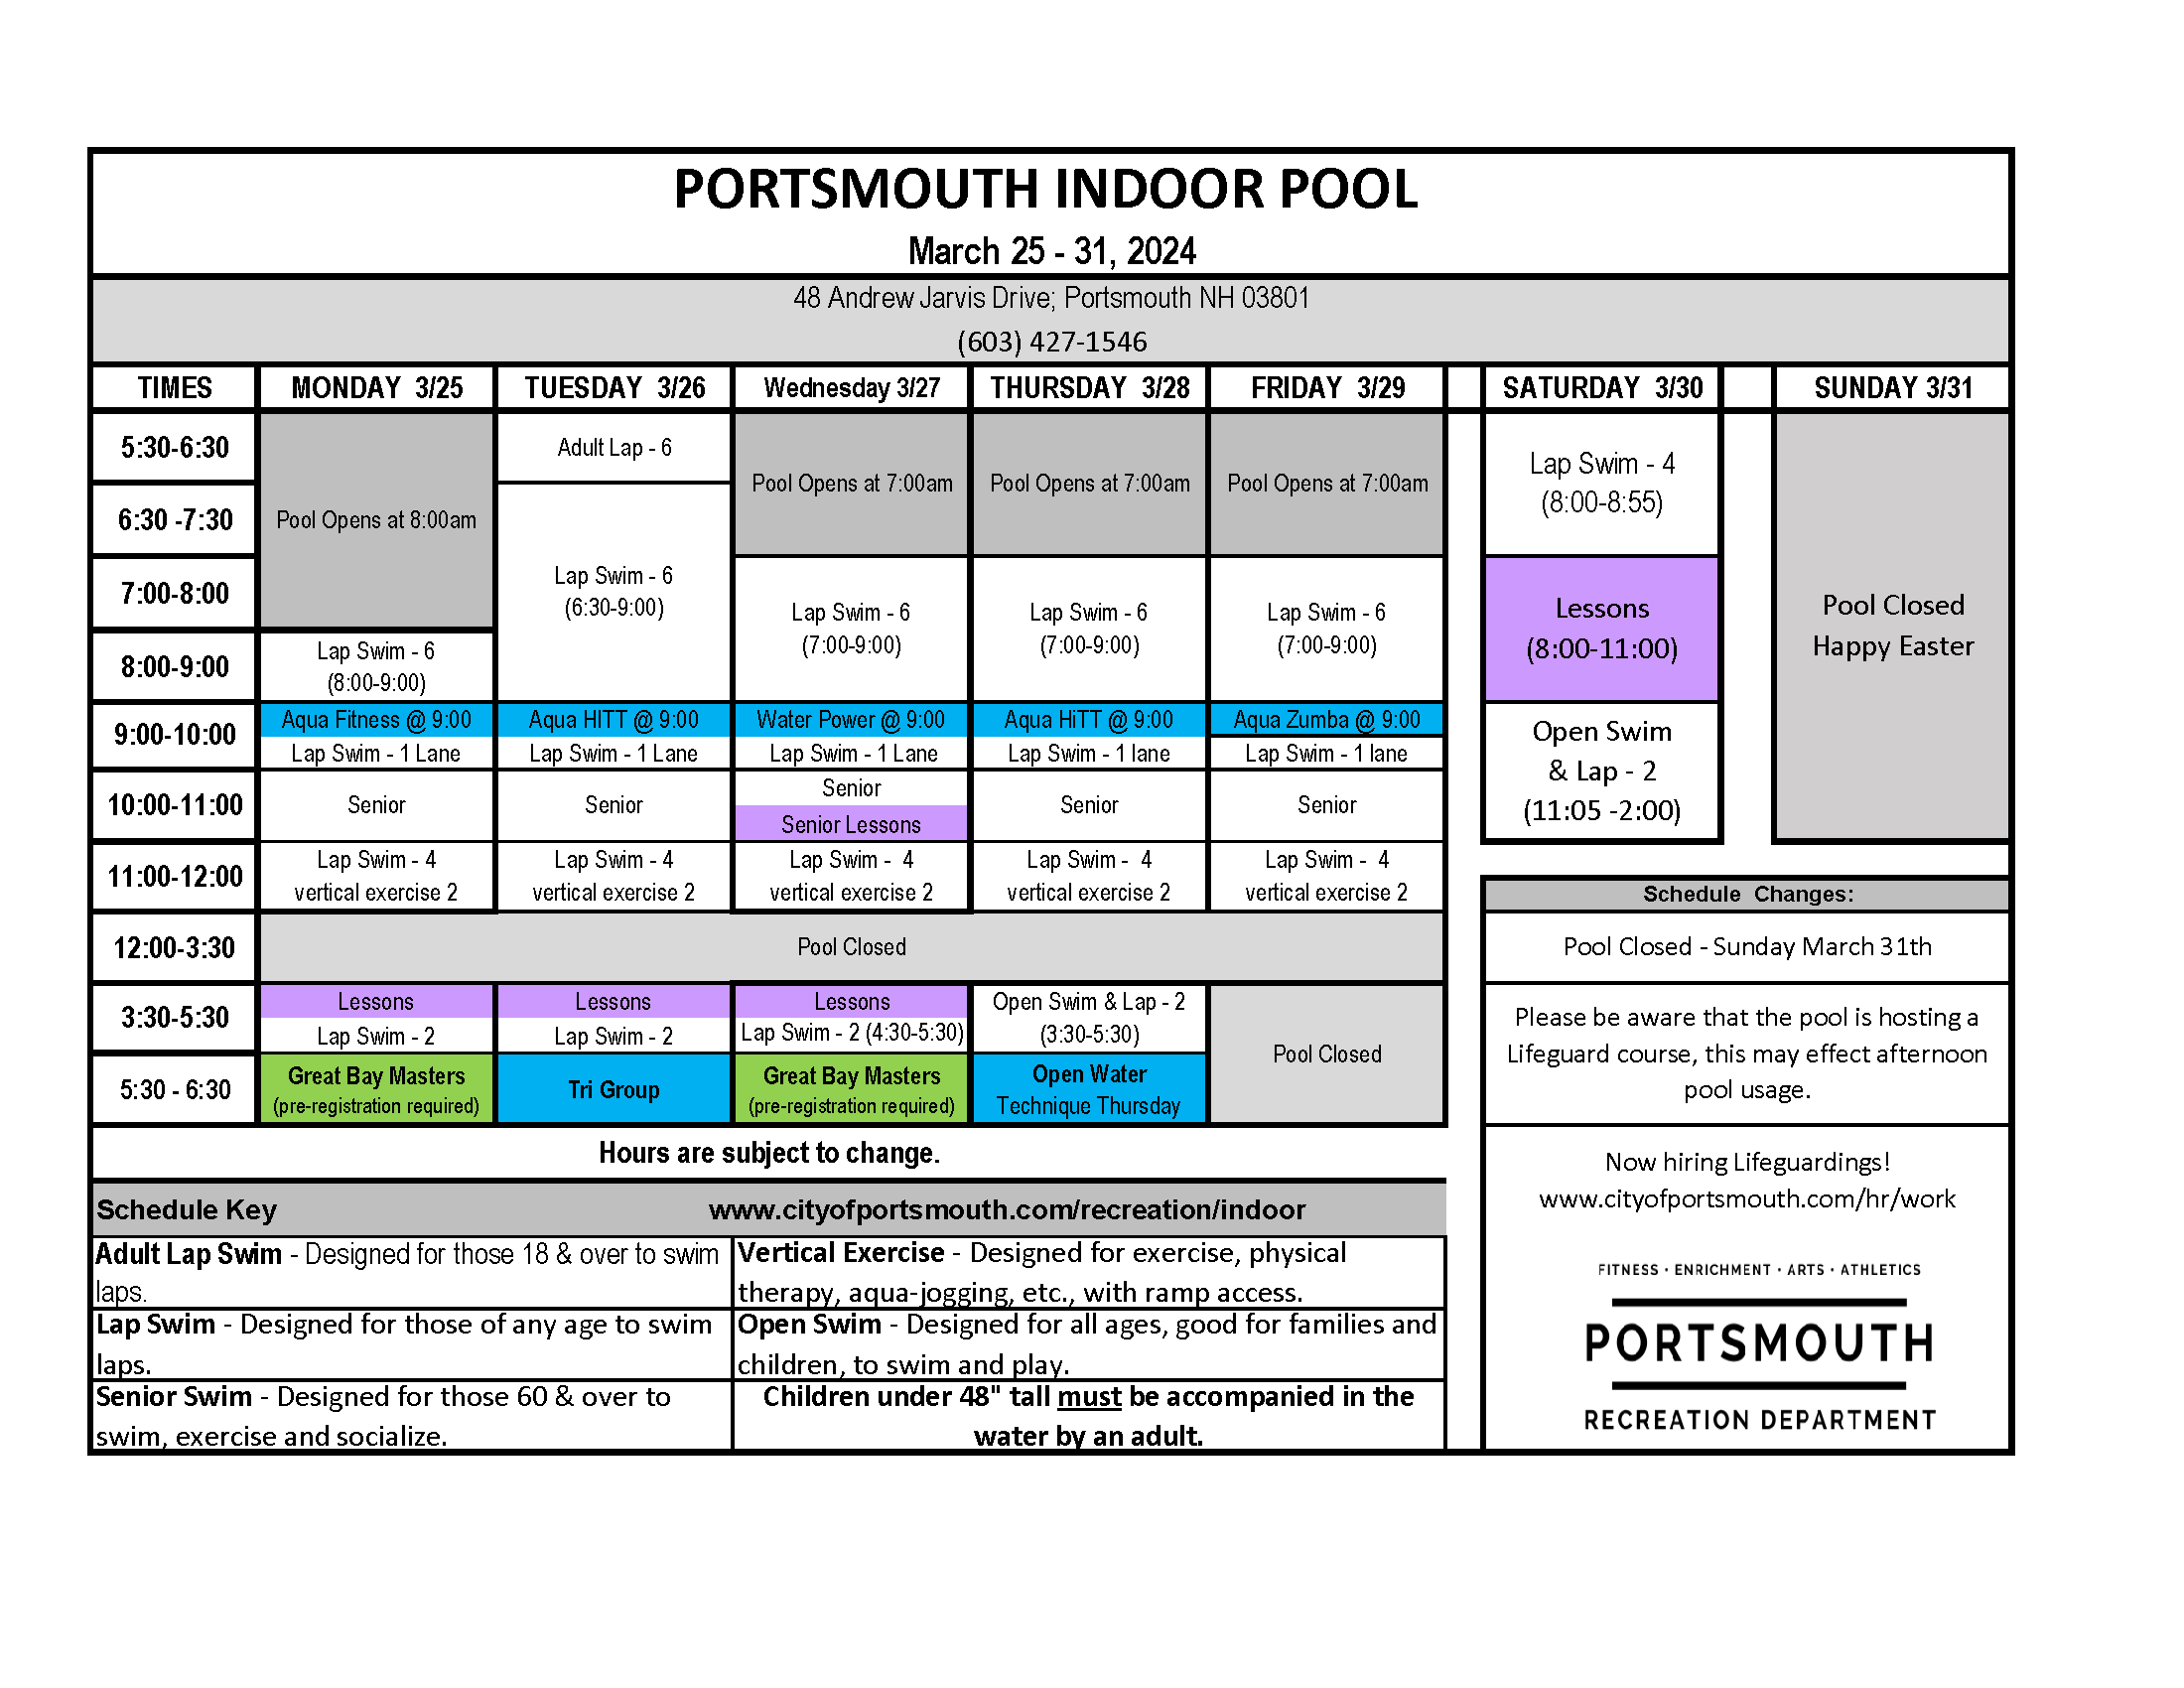 Pool schedule pic